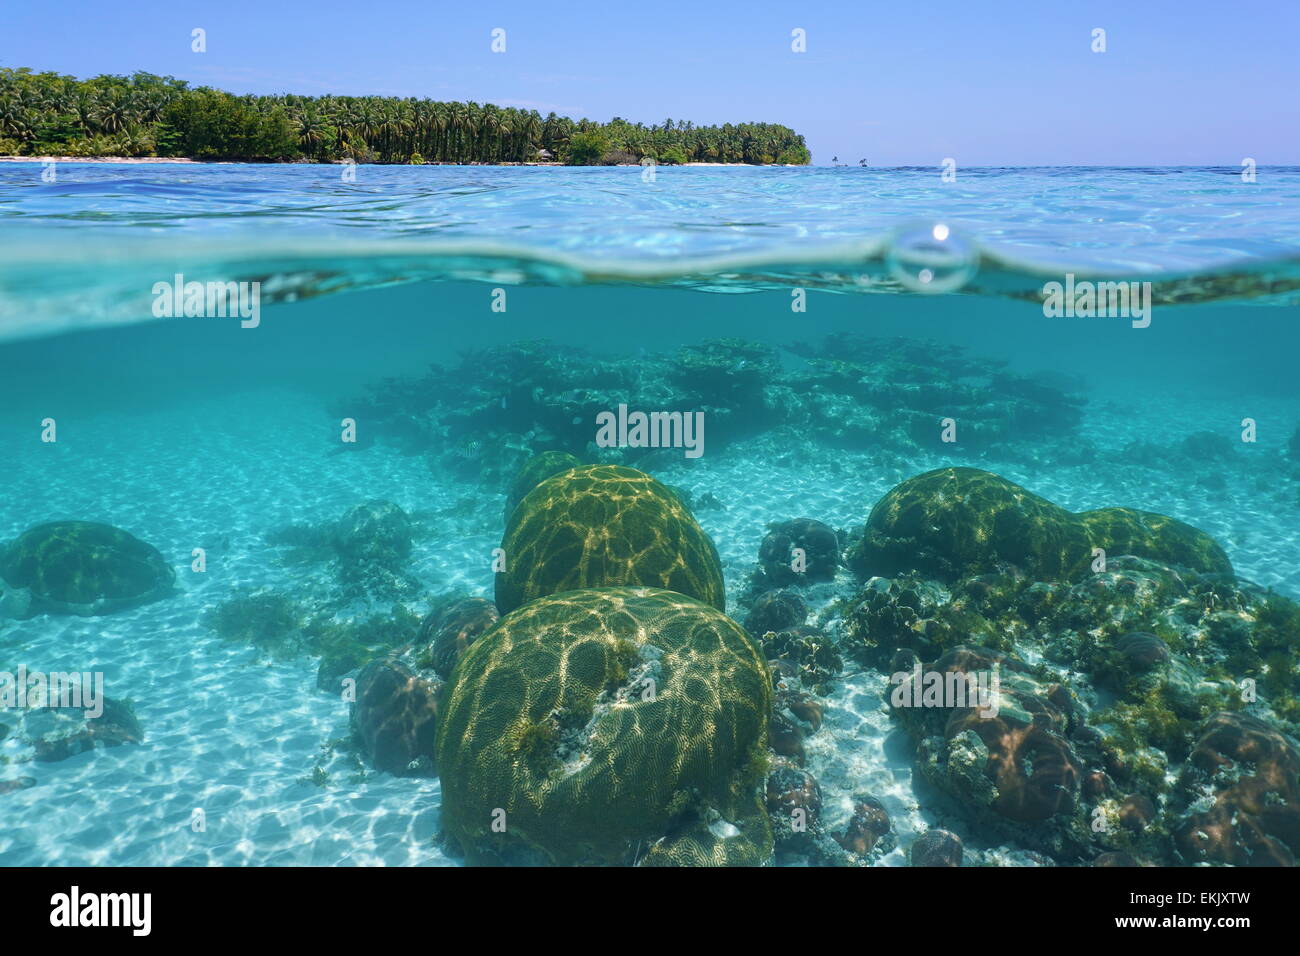 Split view above and below sea surface with corals underwater and over waterline a tropical island at the horizon, Panama Stock Photo